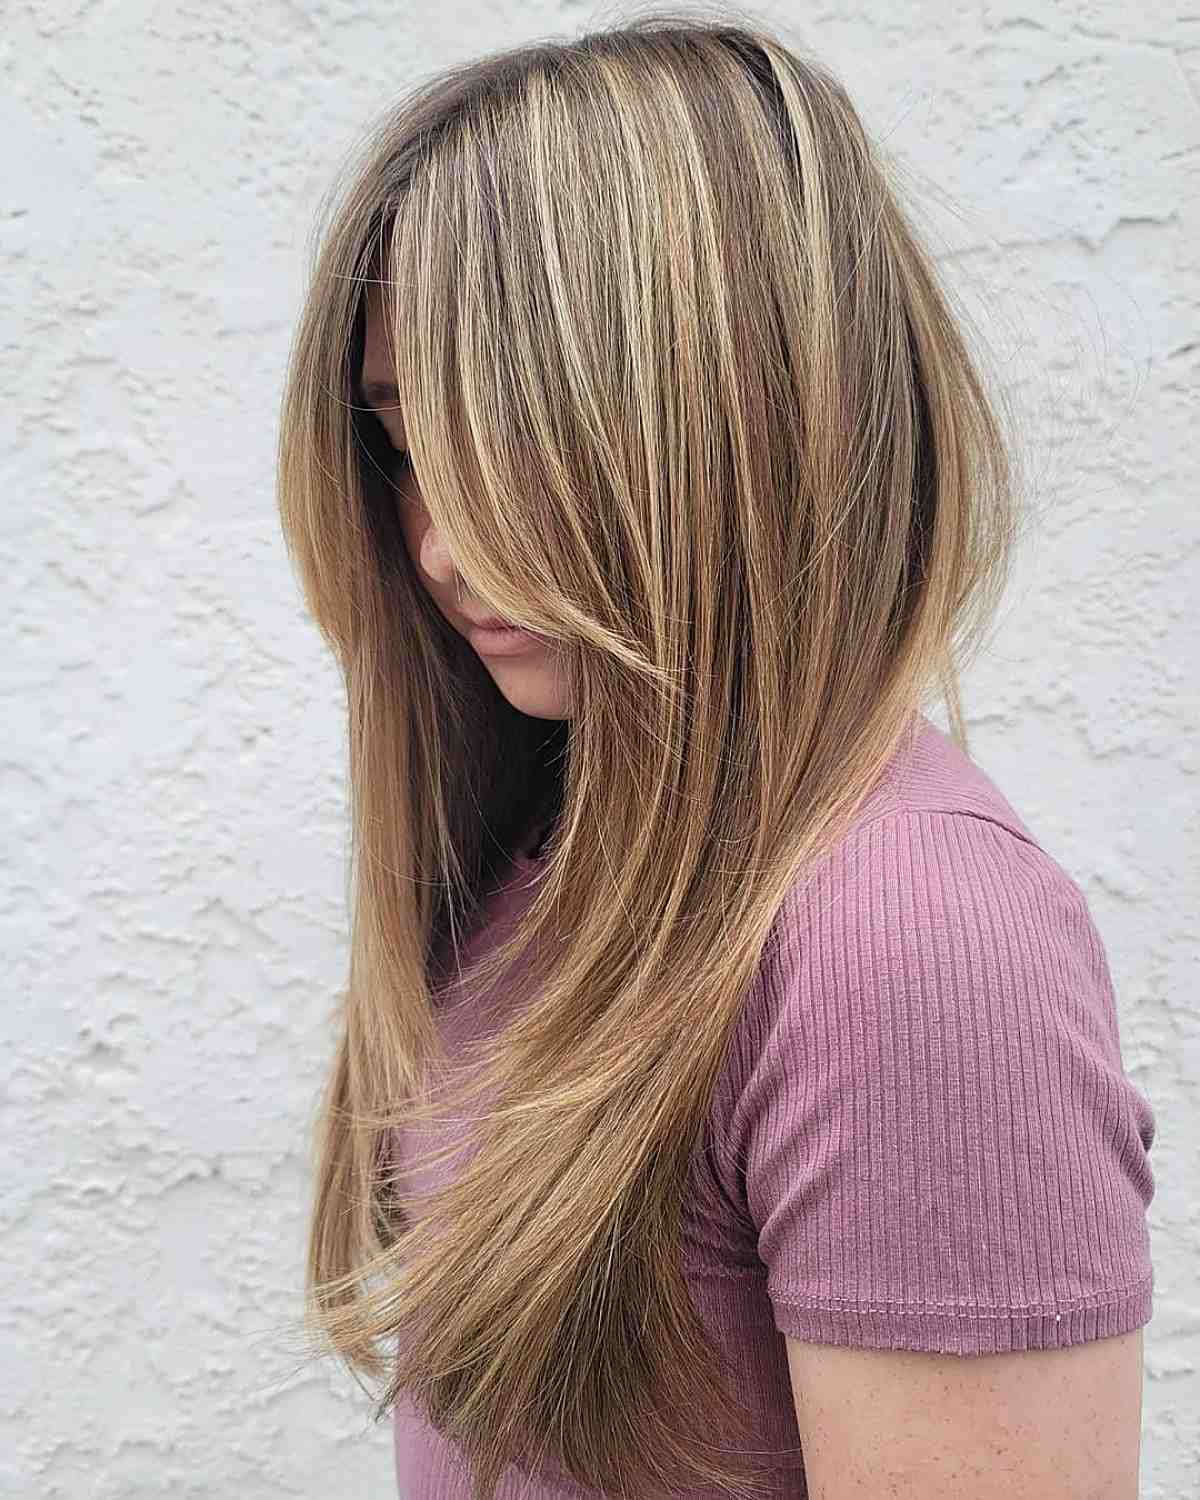 26 ideas for straight layered hair of any length and texture